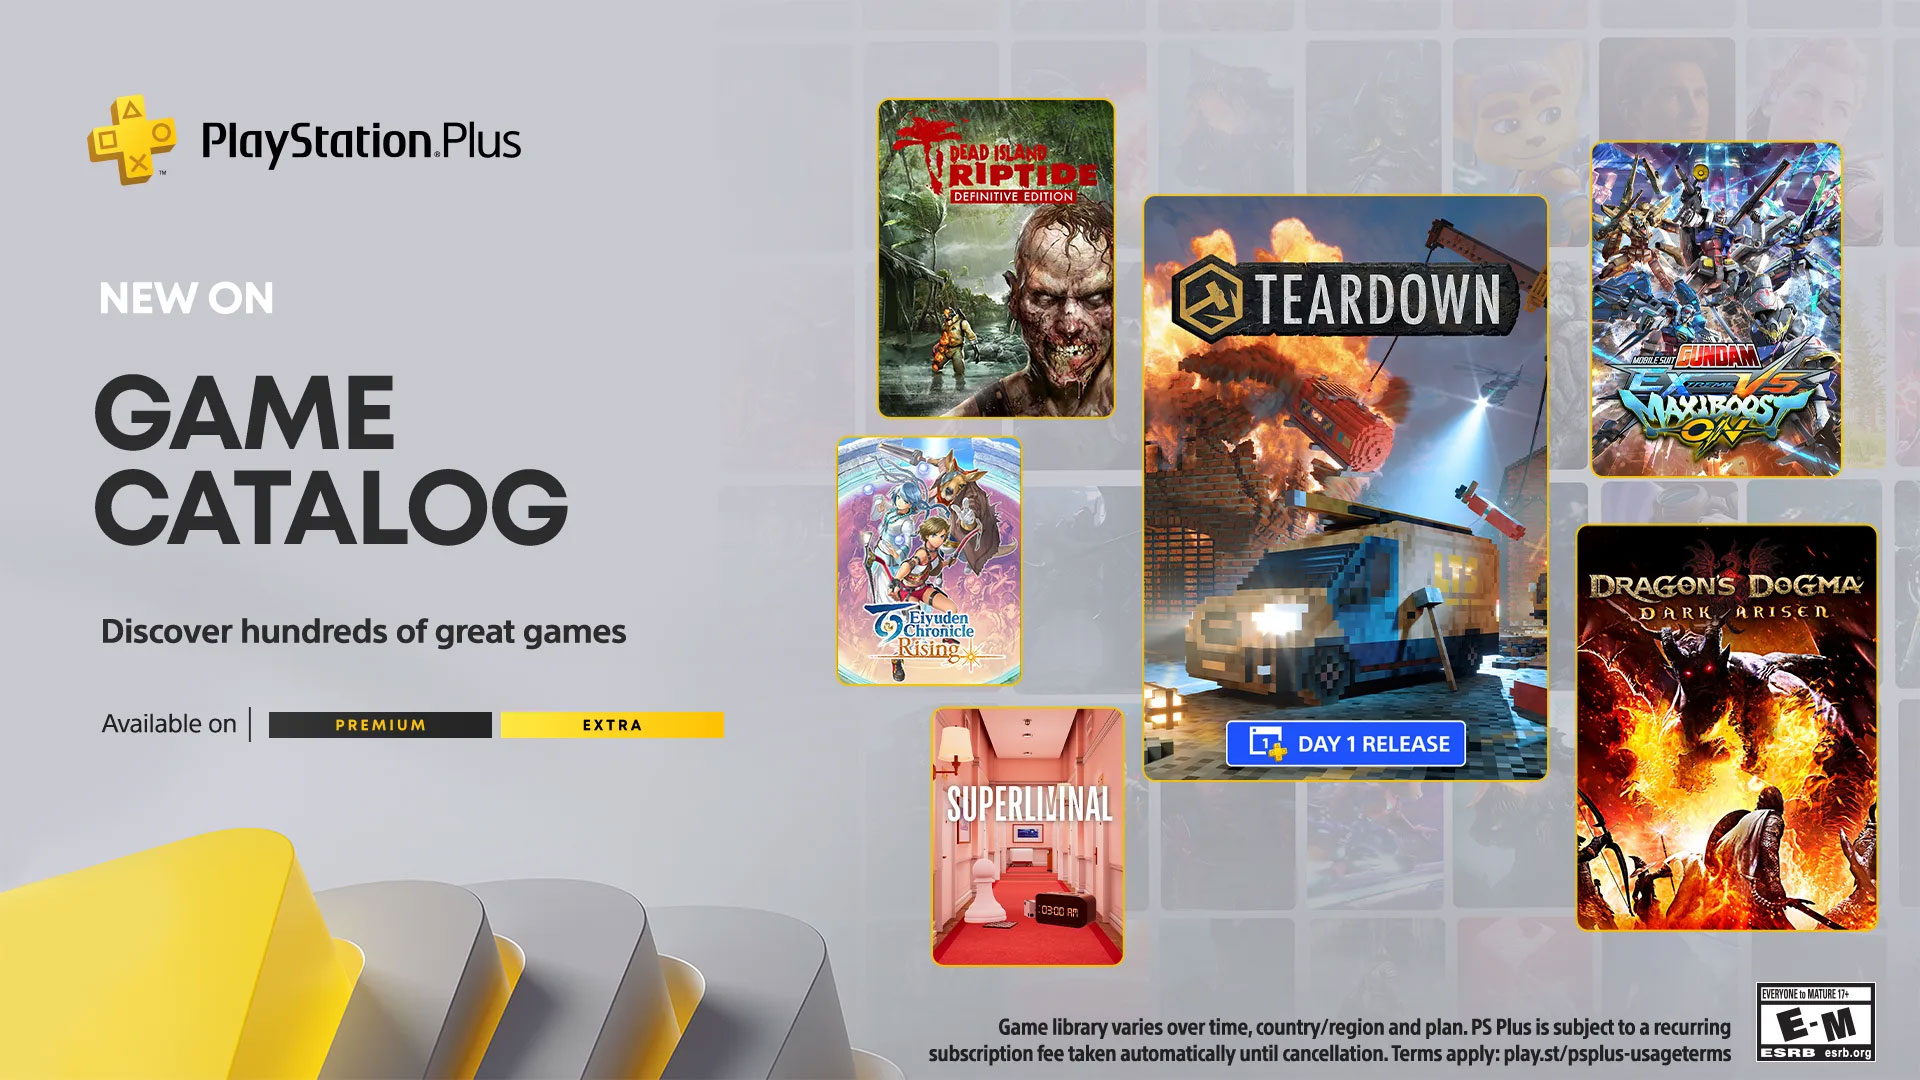 The November PlayStation Plus Game Catalog lineup includes Dragon's Dogma: Dark Arisen, Dead Island: Riptide Definitive Edition, and more